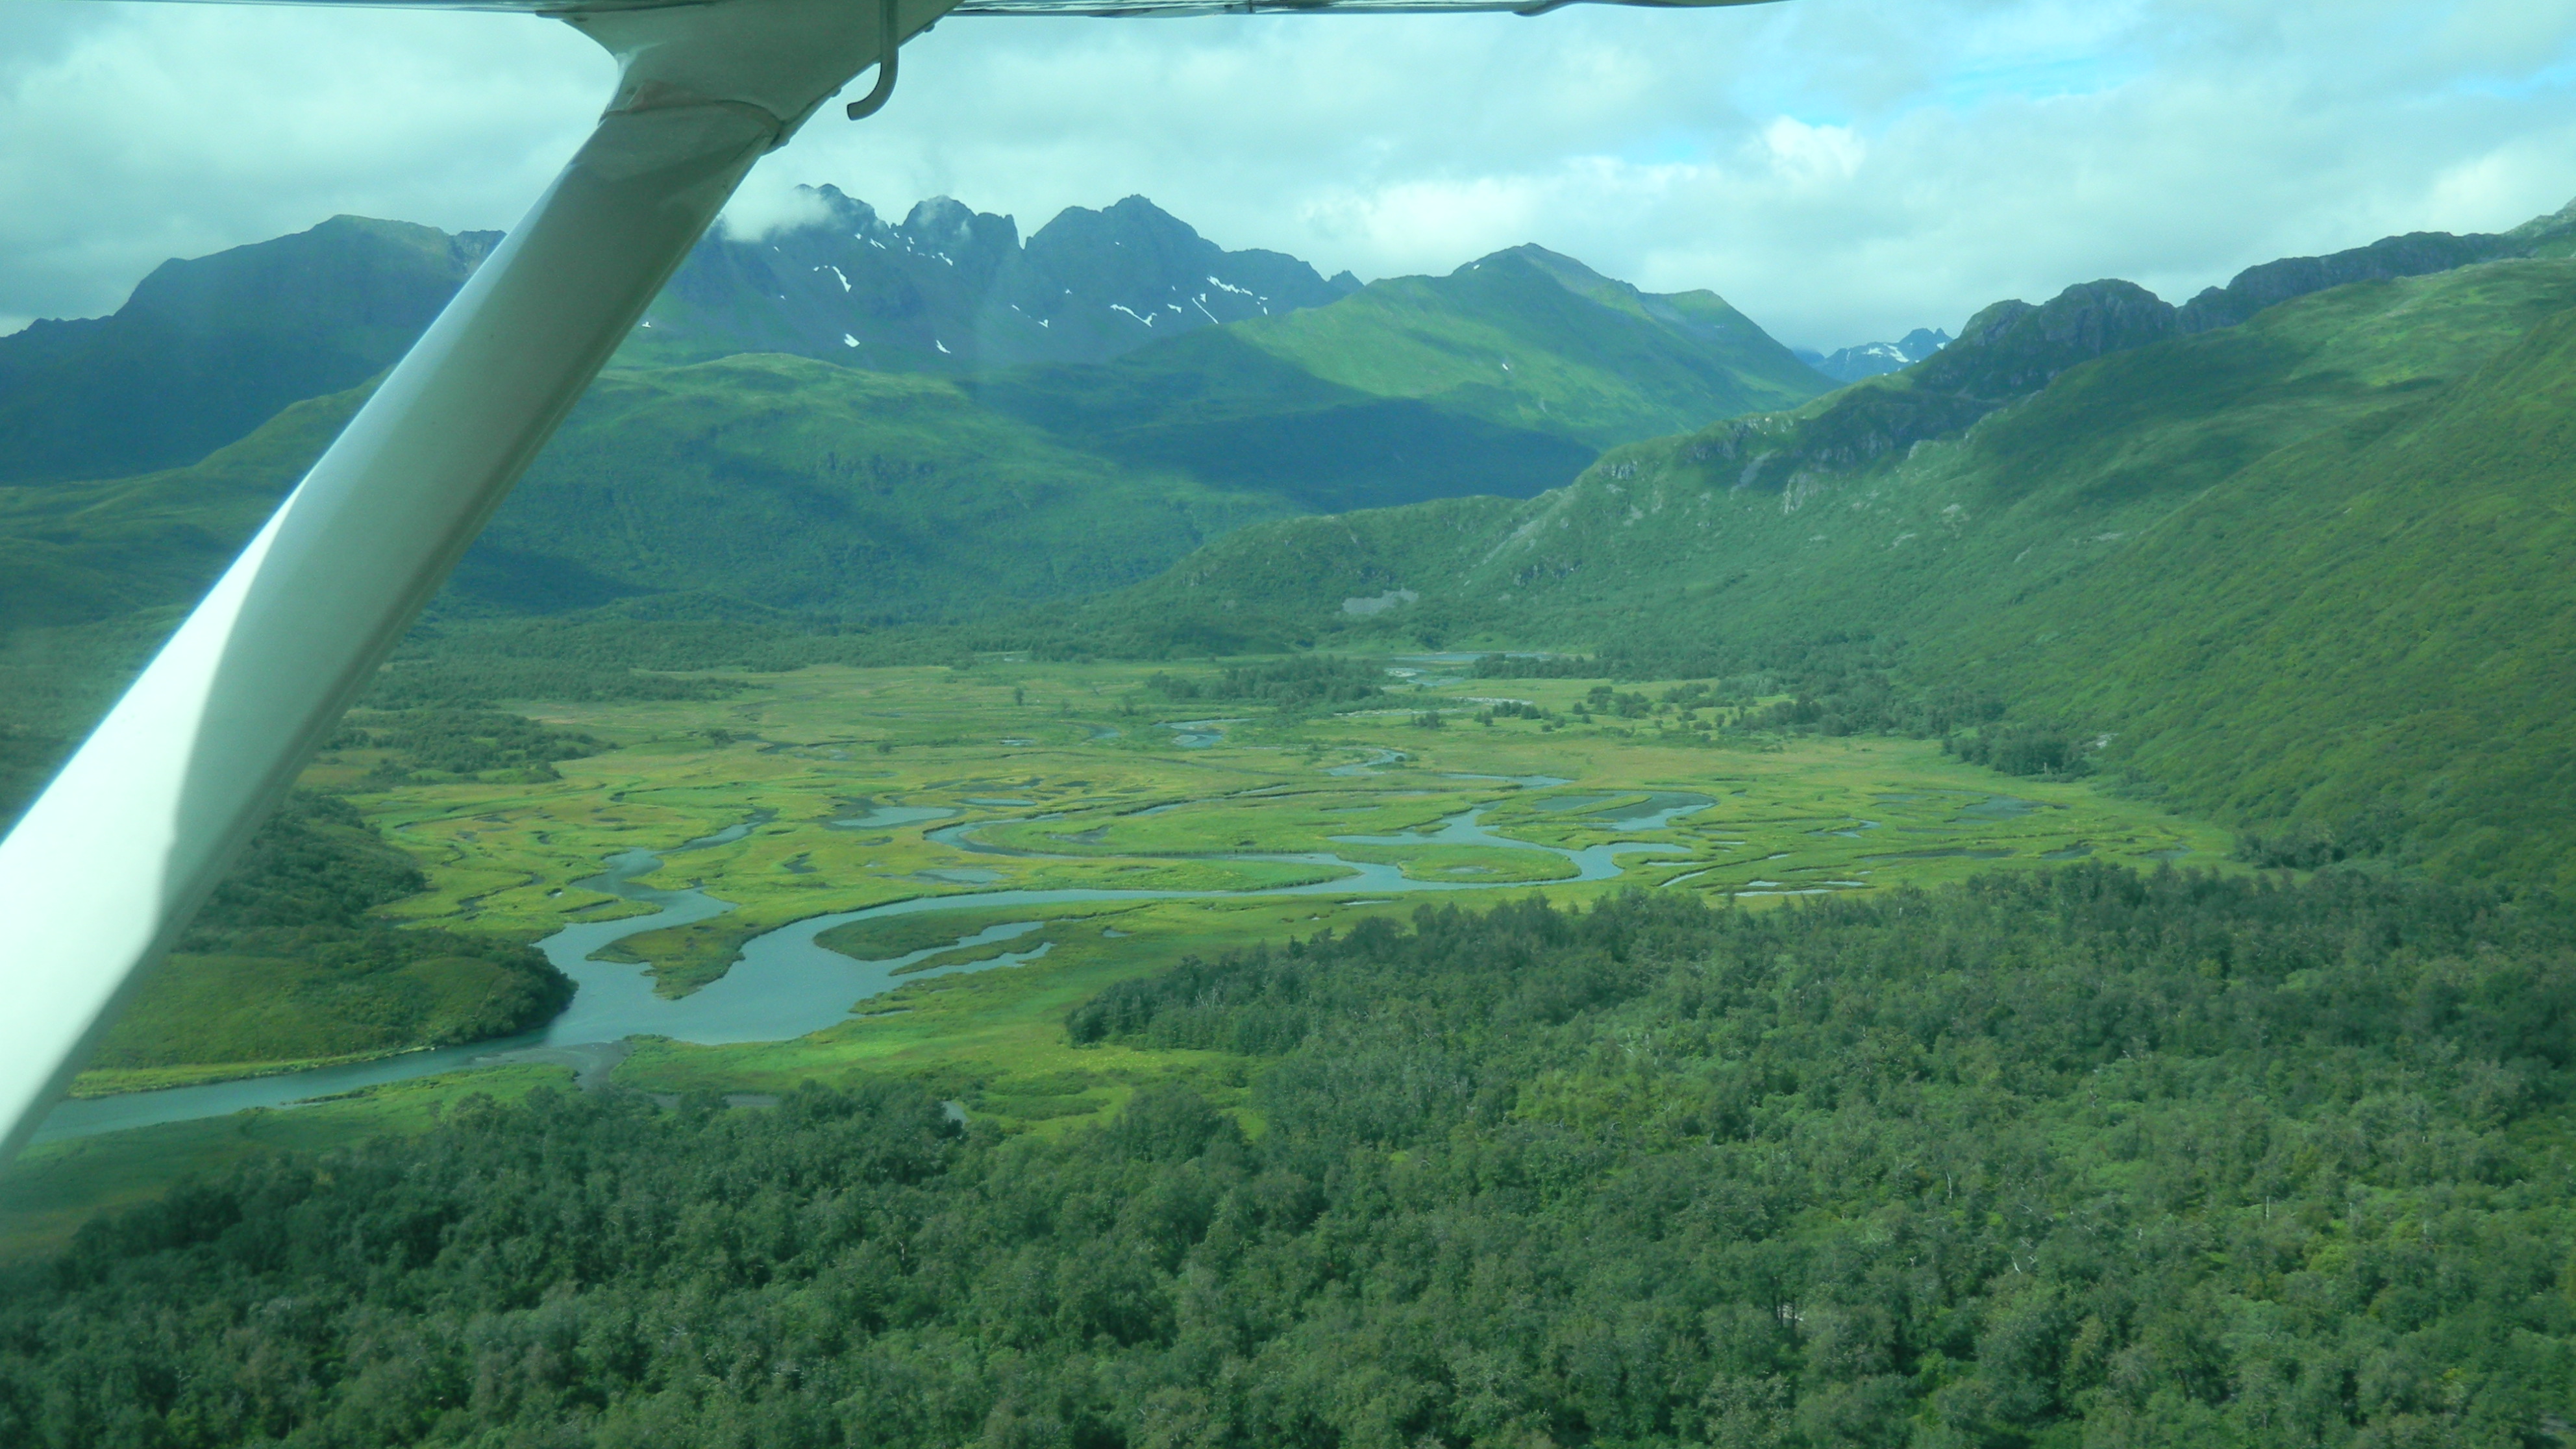 This beautiful, lush Kodiak Alaska landscape shows rivers that are ripe for fishing of Alaskan salmon and dolly varden.